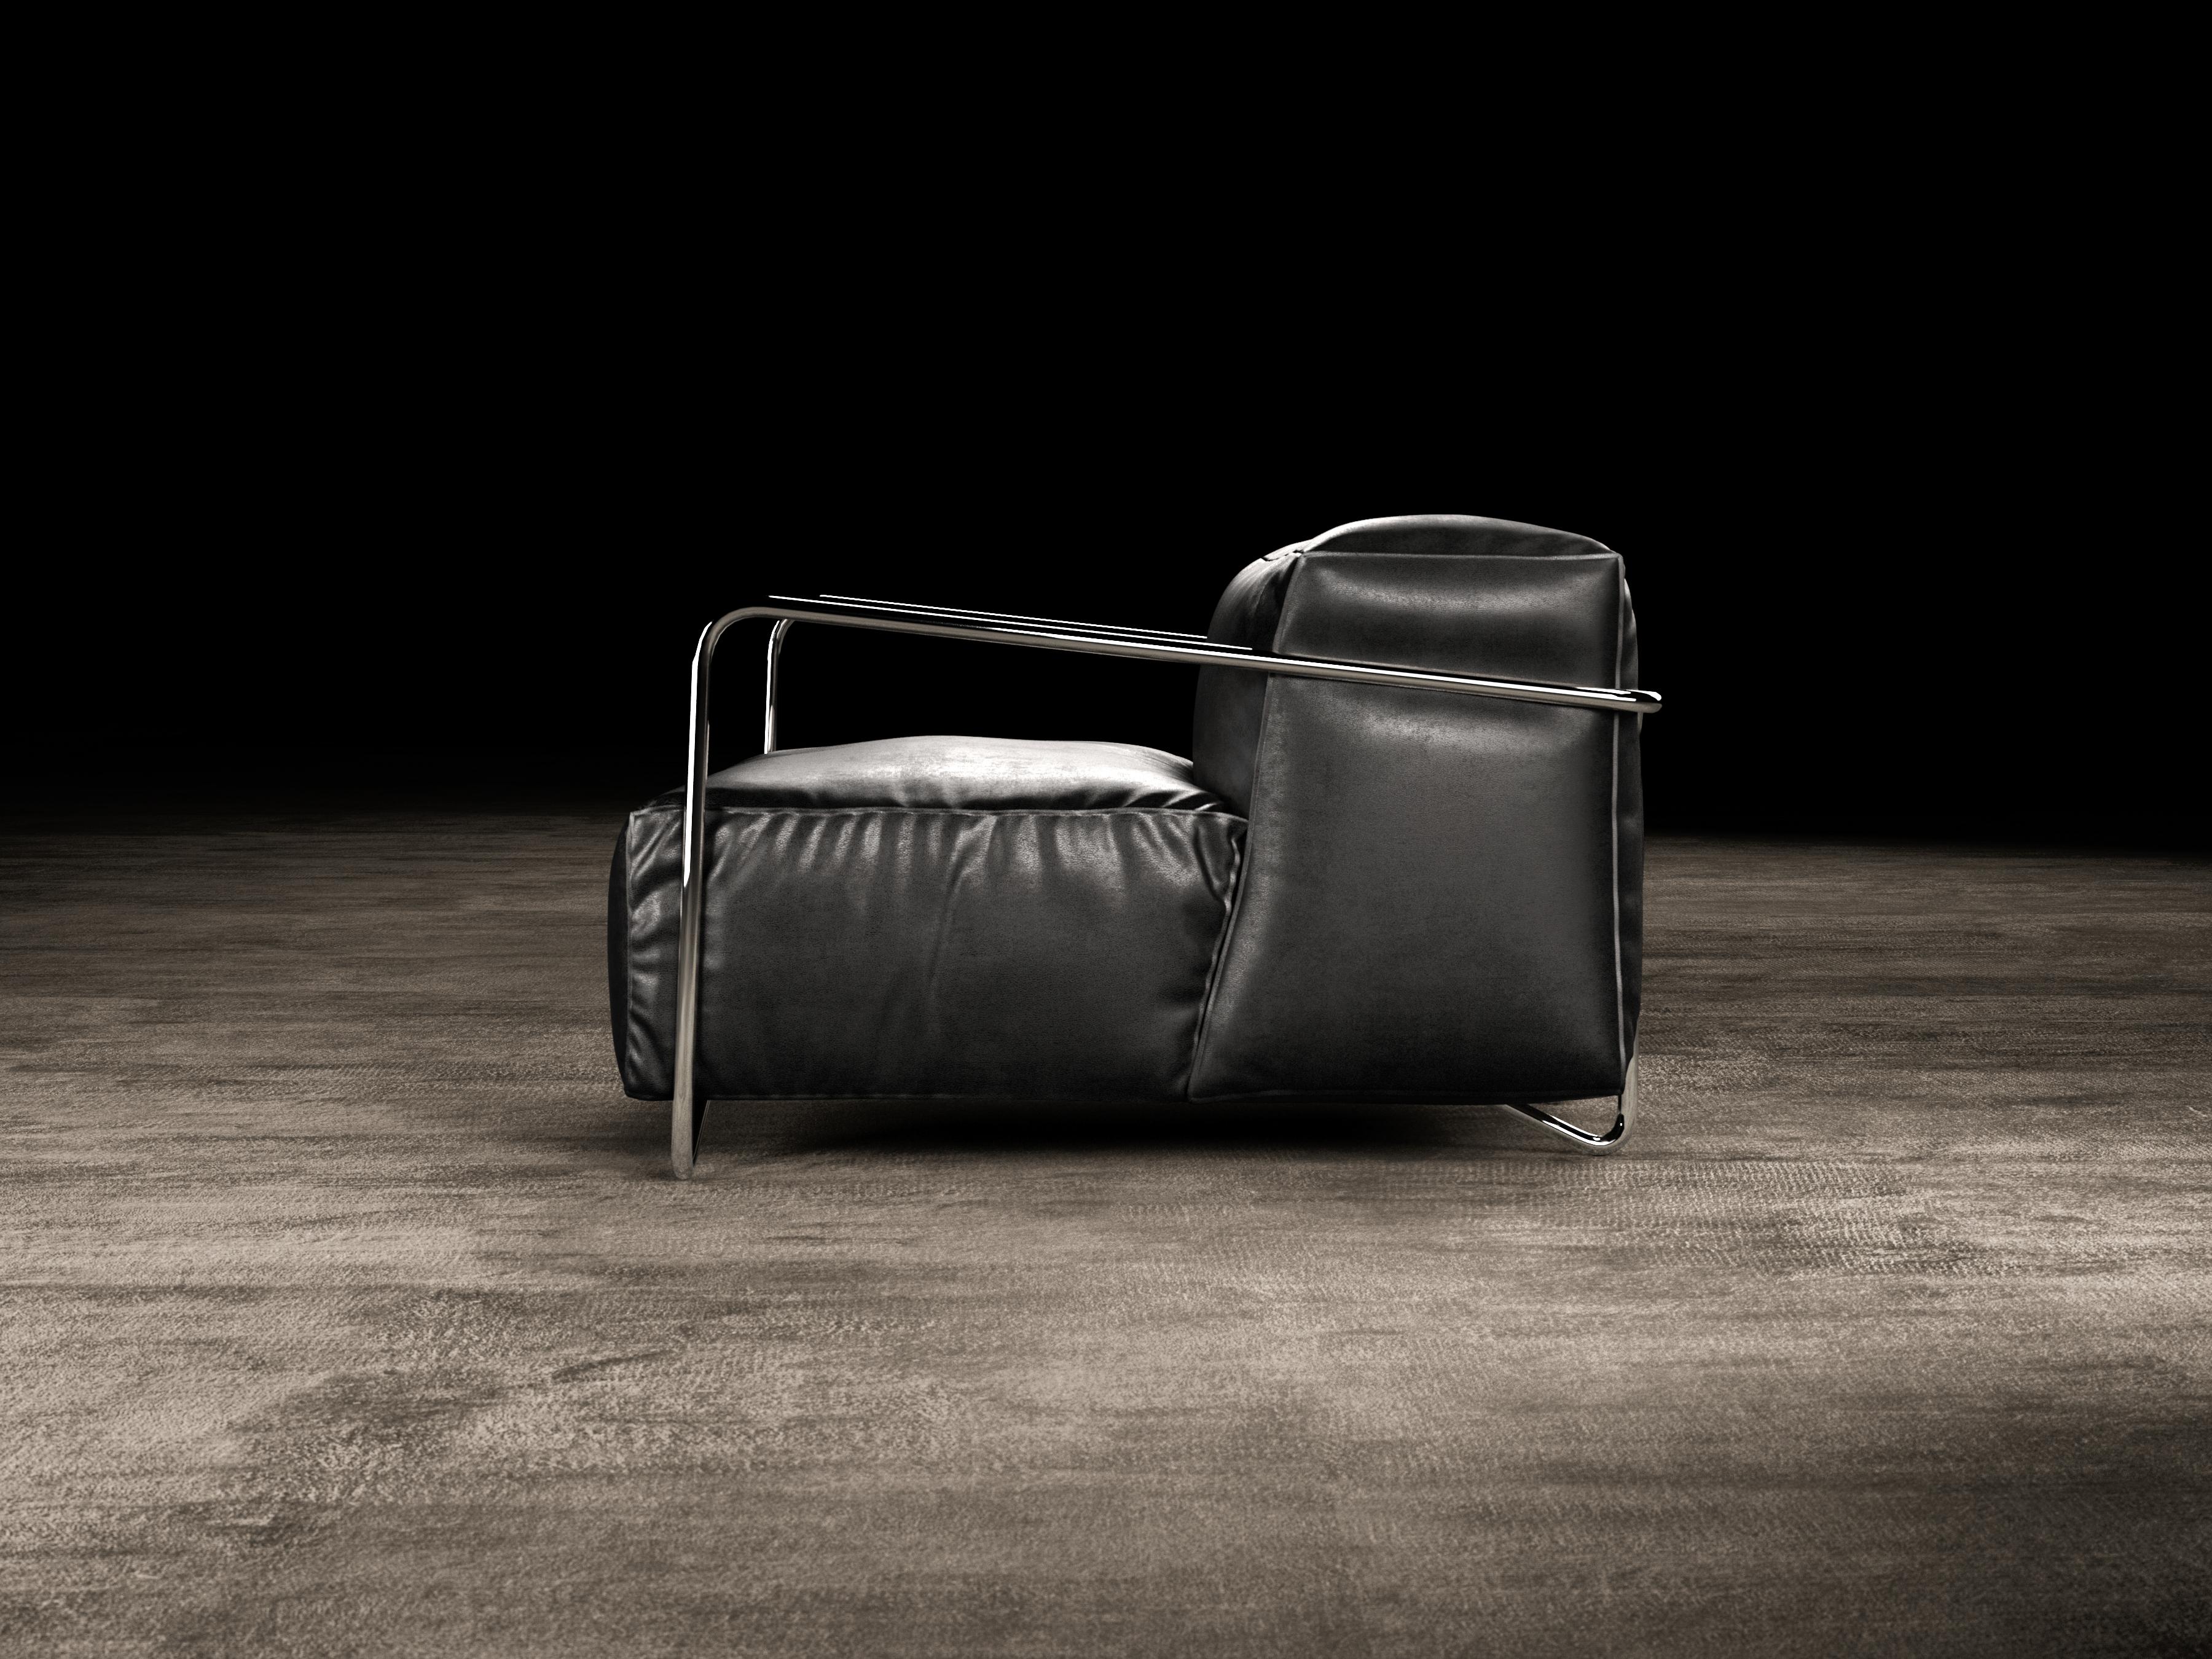 JE T'attends armchair is part of the Esprit Noir Capsule Collection.
JE T'attends armchair is composed of a wooden shell padded with differentiated density polyurethane foam with a top layer mixed with goose feather. The armchair is completely